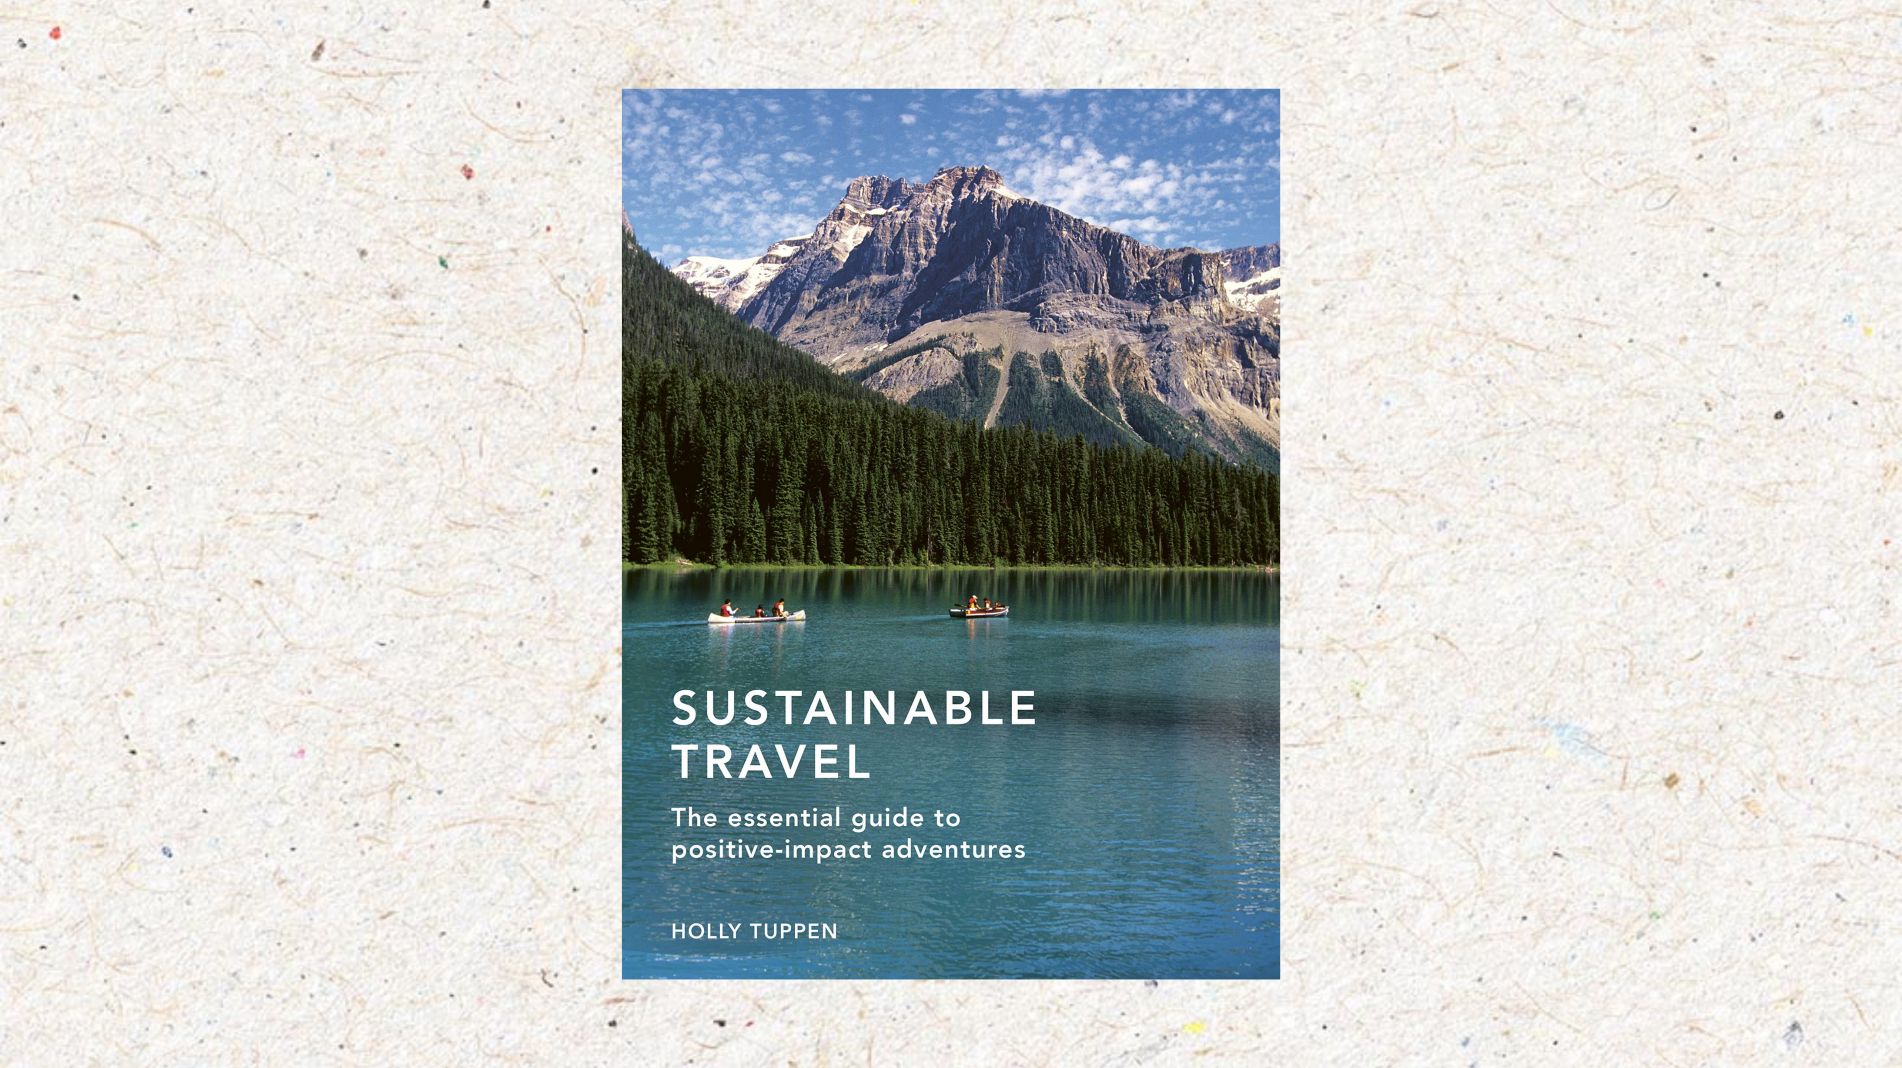 Book Club: Holly Tuppen - Sustainable Travel